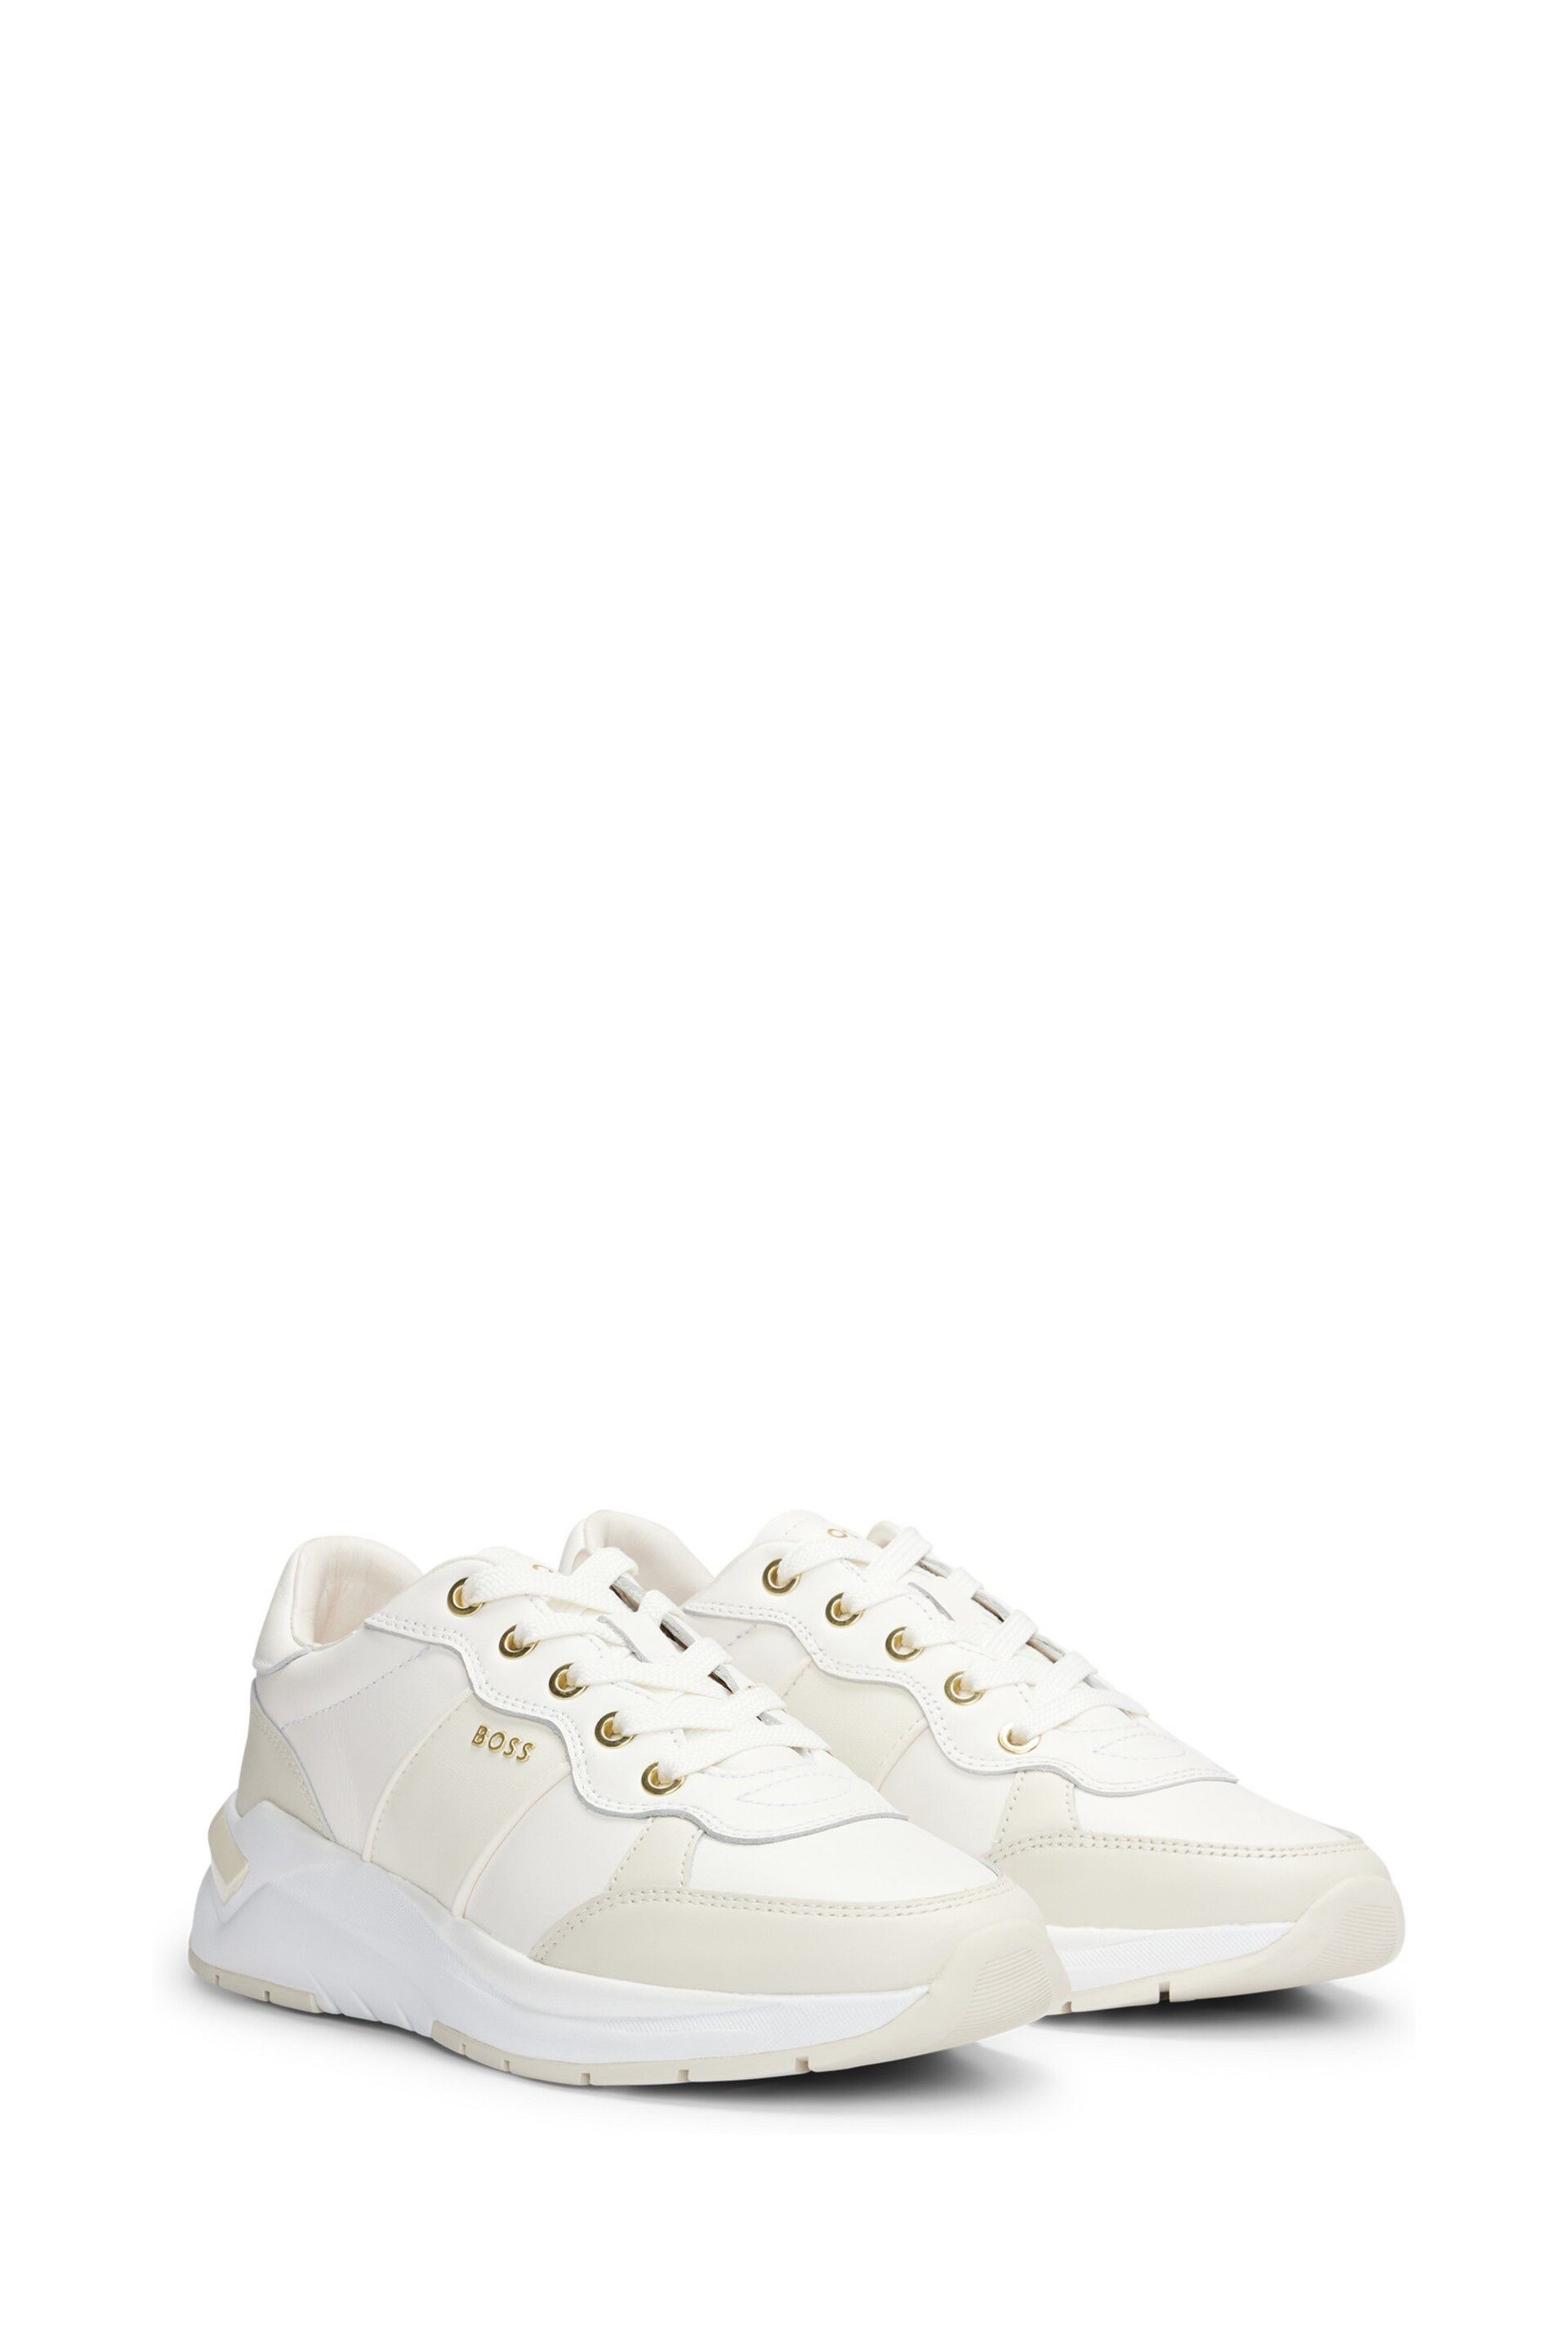 BOSS Cream Chunky Leather Trainers - Image 2 of 3